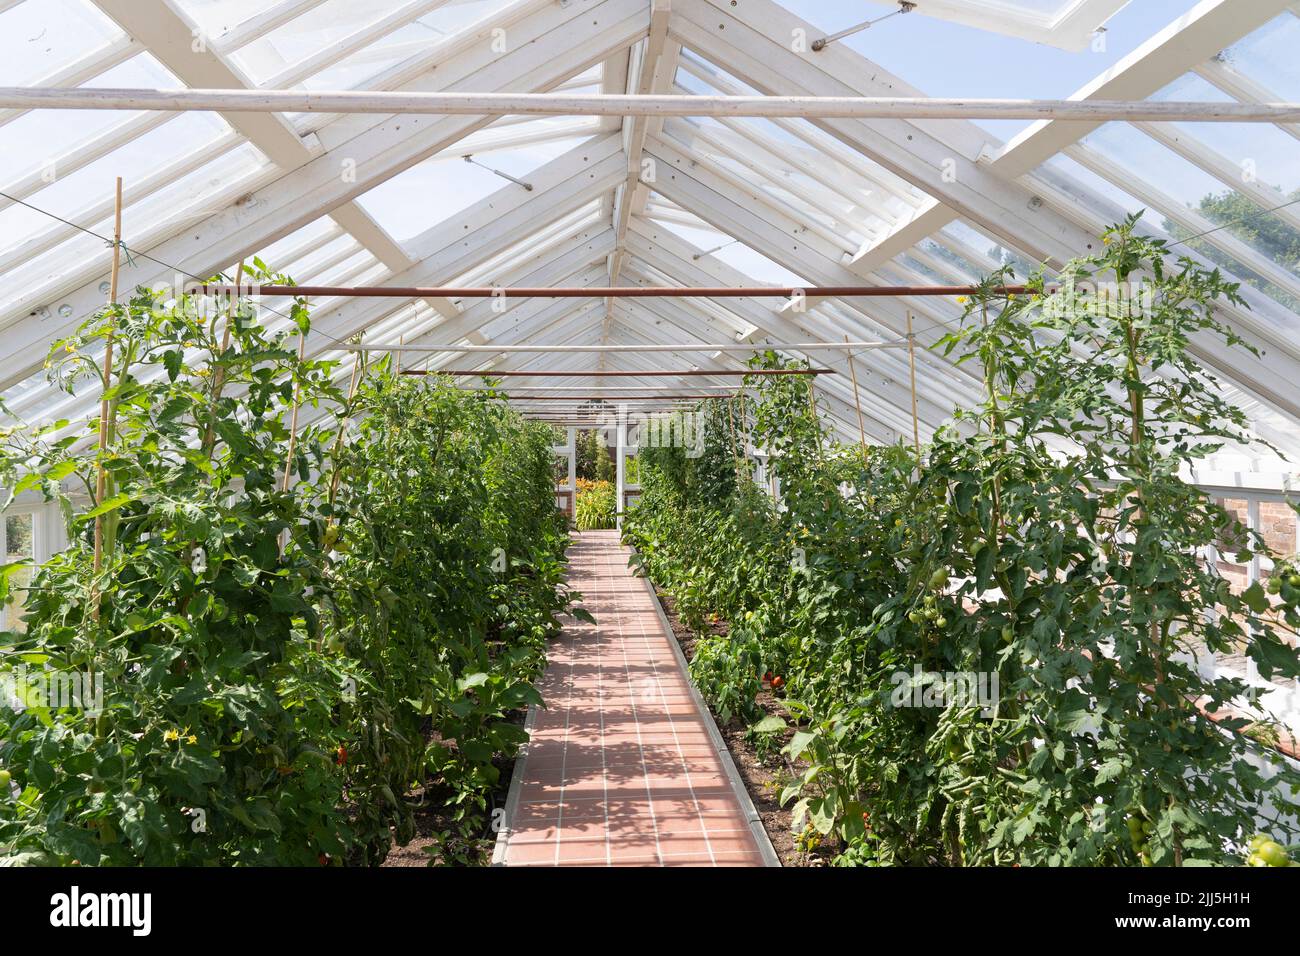 White wooden greenhouse with tomato plants growing in the renovated historic Georgian Walled Gardens of Croome Court, Worcestershire, UK Stock Photo